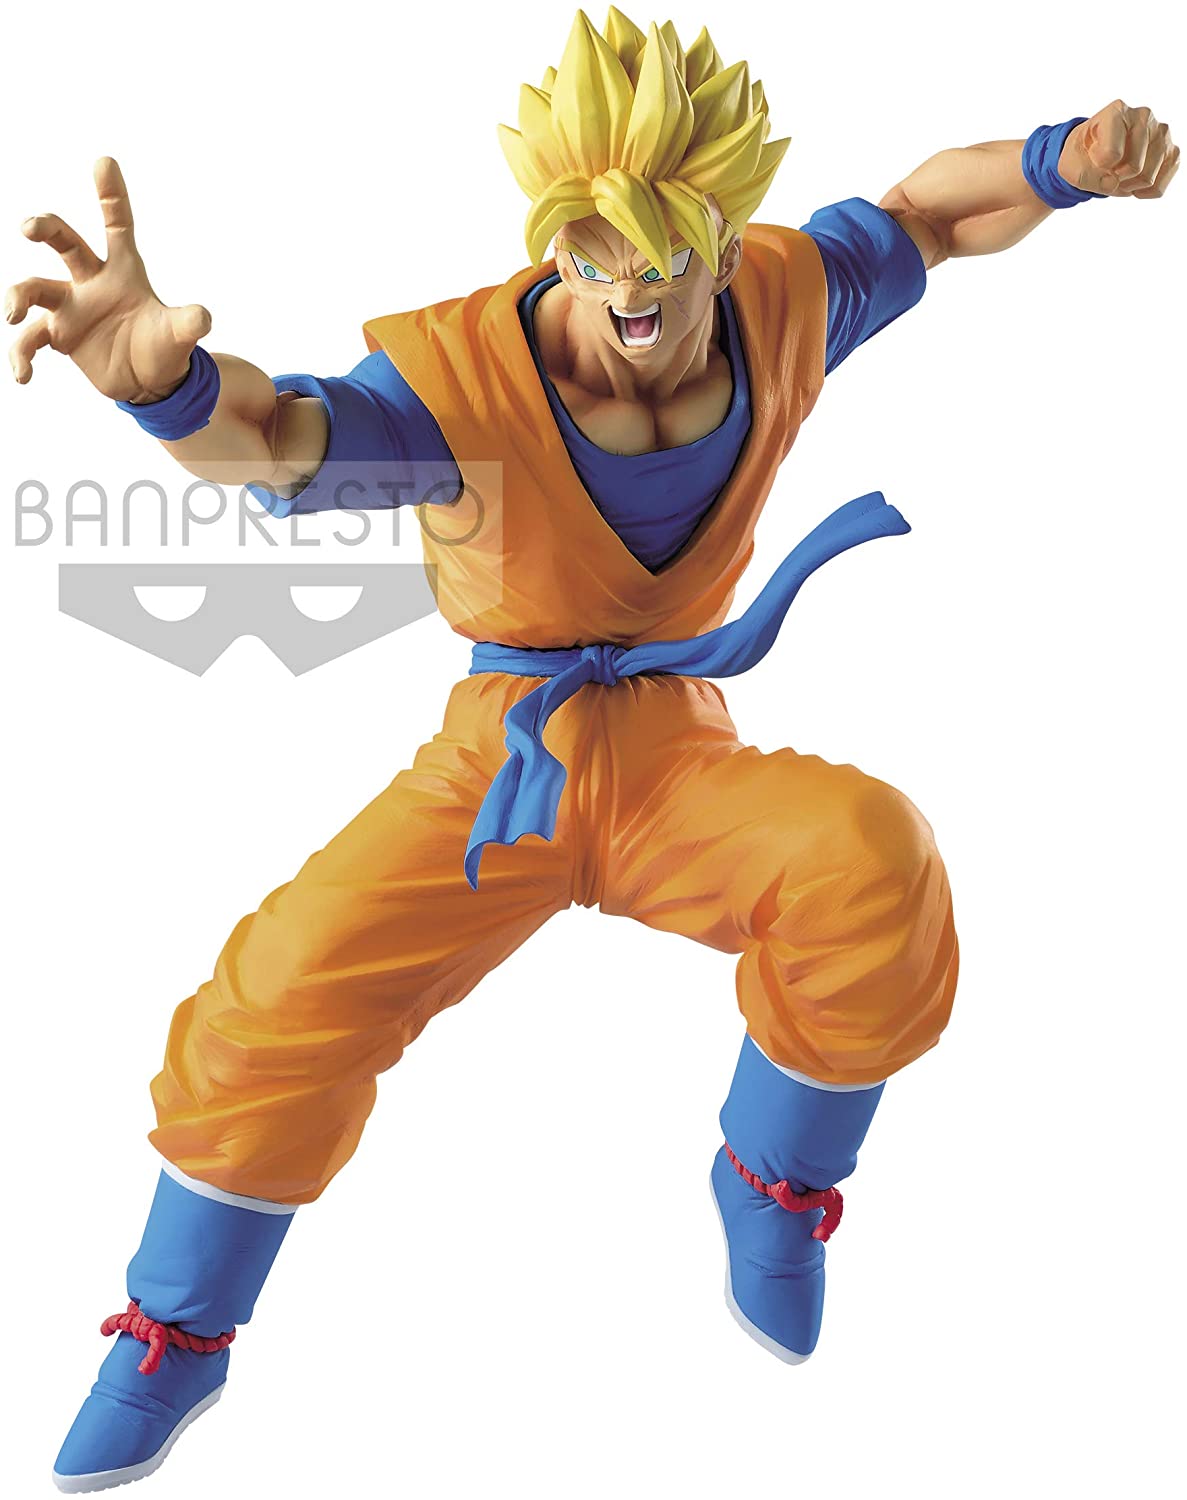 Dragon Ball Legends Collab Son Gohan Figure - Super Anime Store FREE SHIPPING FAST SHIPPING USA